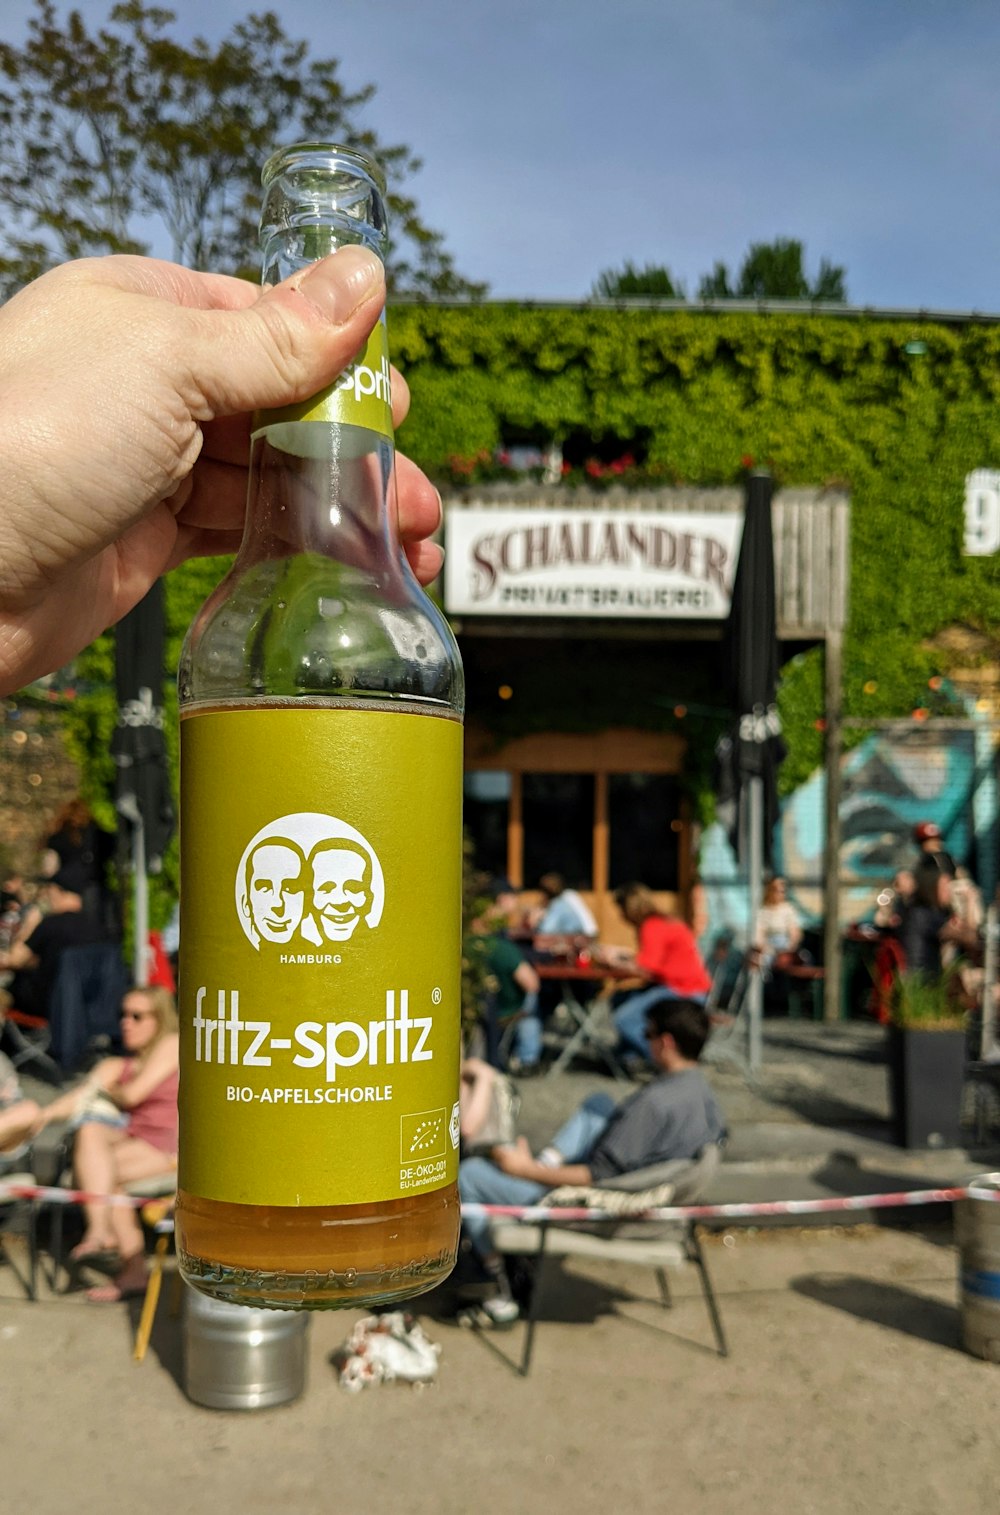 a person holding a bottle of fizz - spotz in front of a crowd